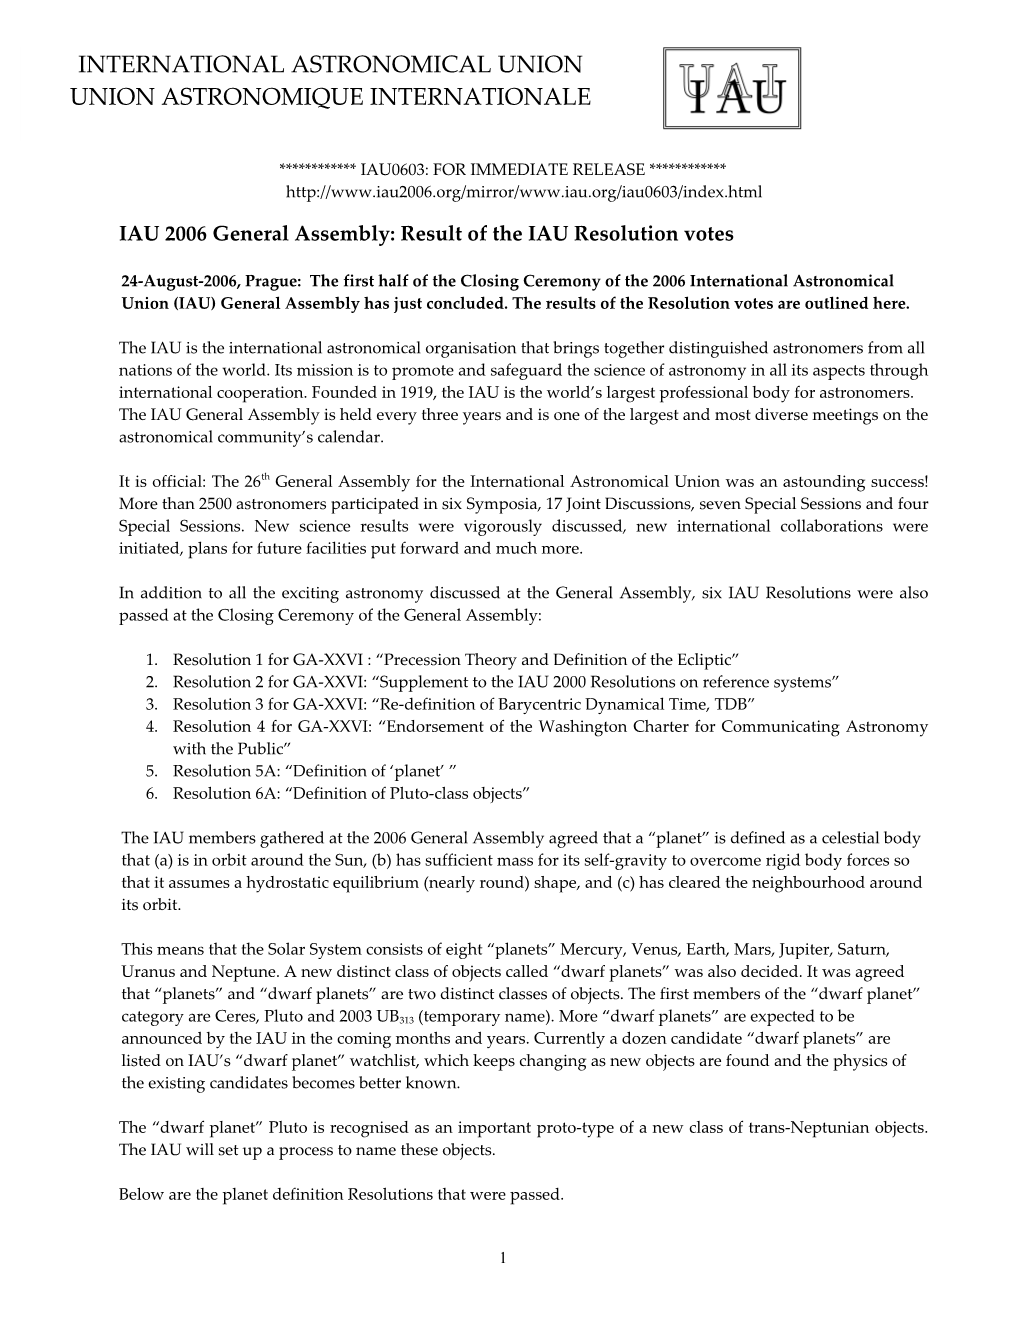 IAU 2006 General Assembly: Result of the IAU Resolution Votes